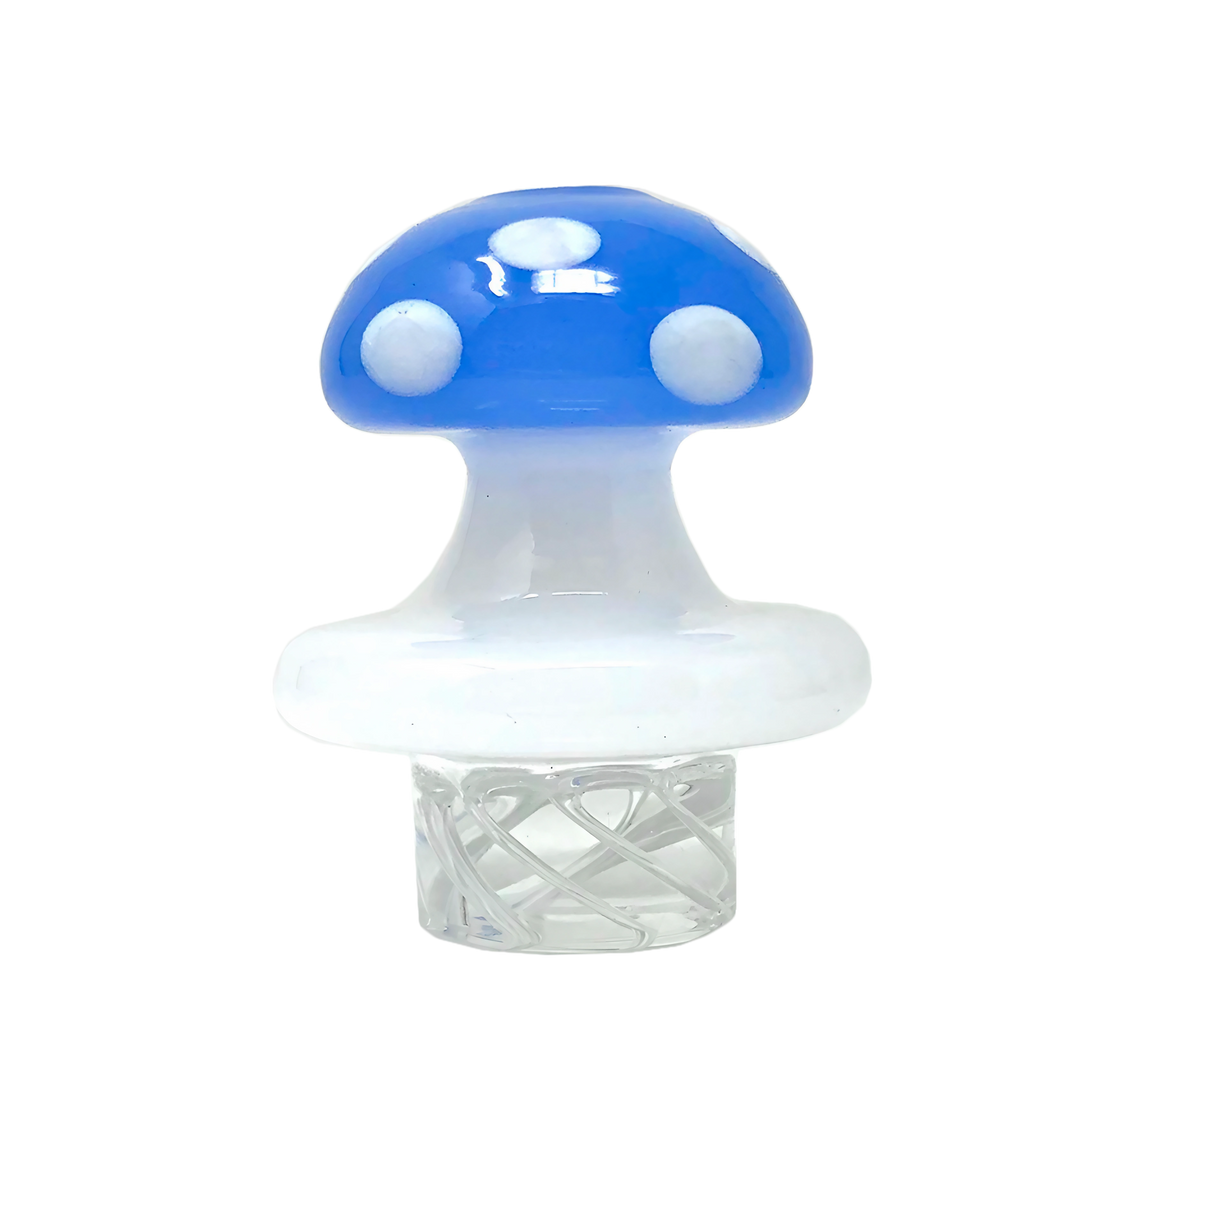 AFM Glass - Blue Turbo Spinner Mushroom Cap with 2 Glass Pearls, Front View | DankGeek